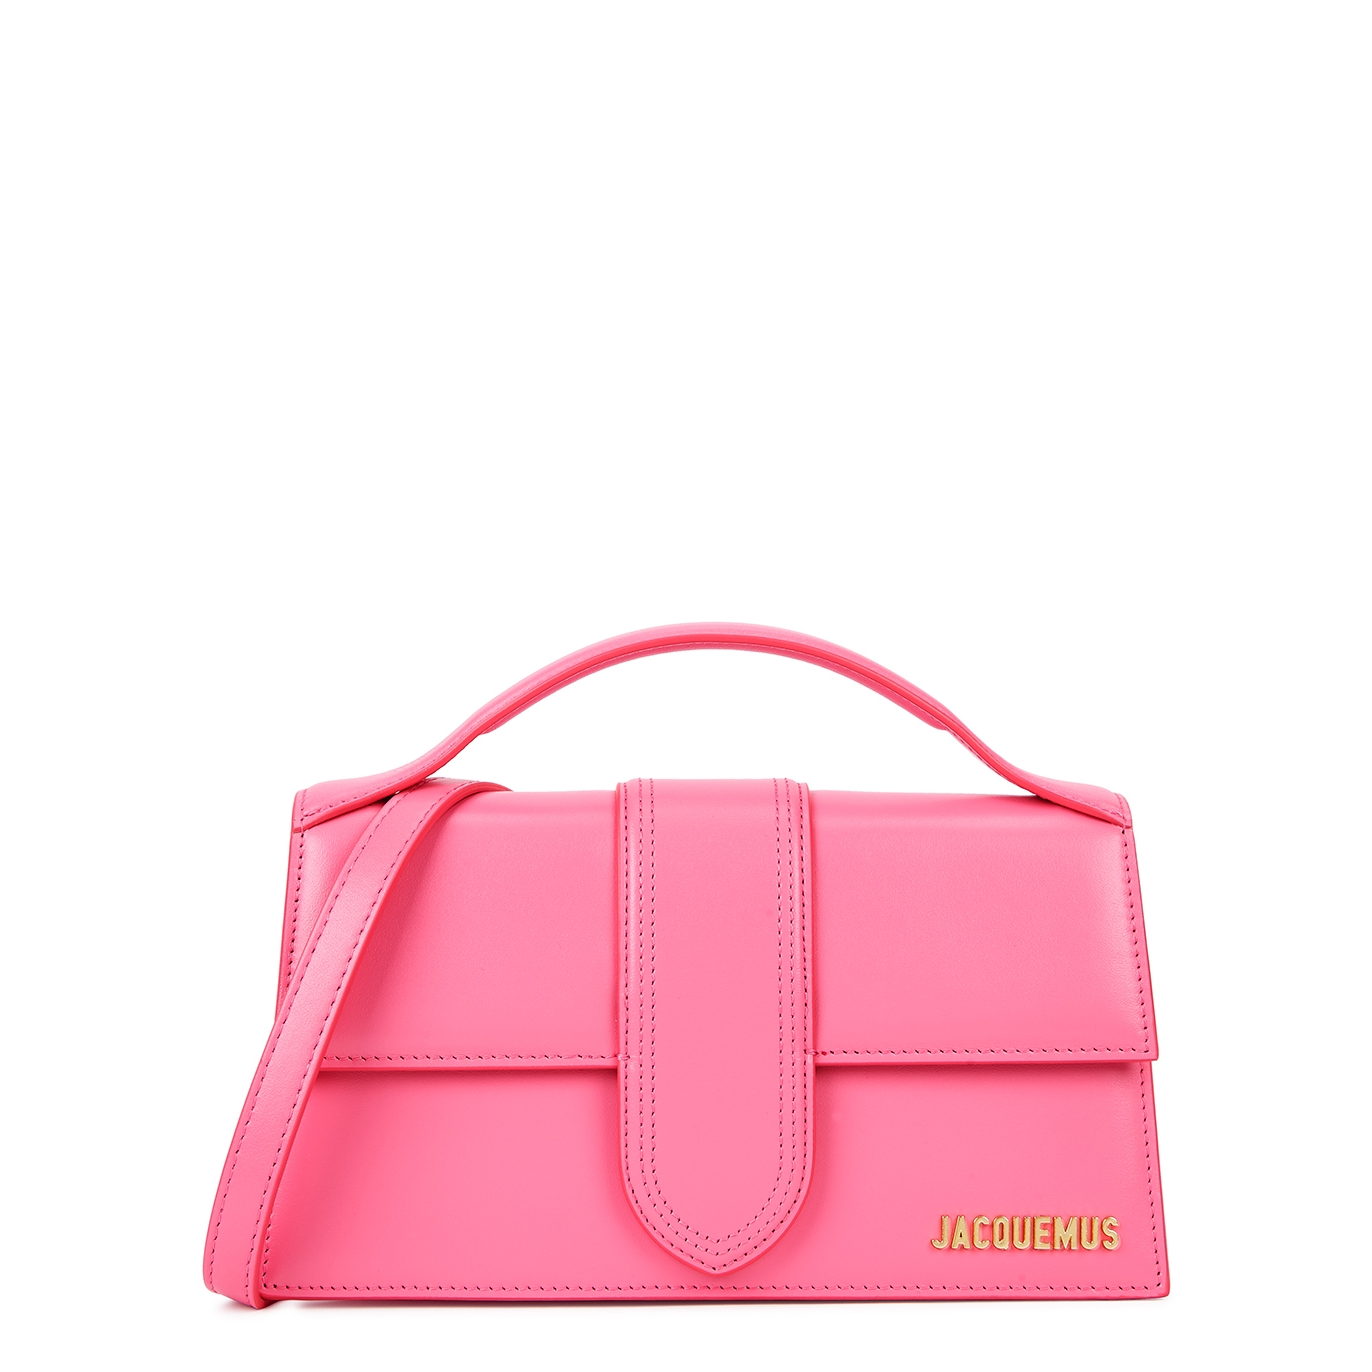 Jacquemus Le Grande Bambino Pink Leather Top Handle Bag